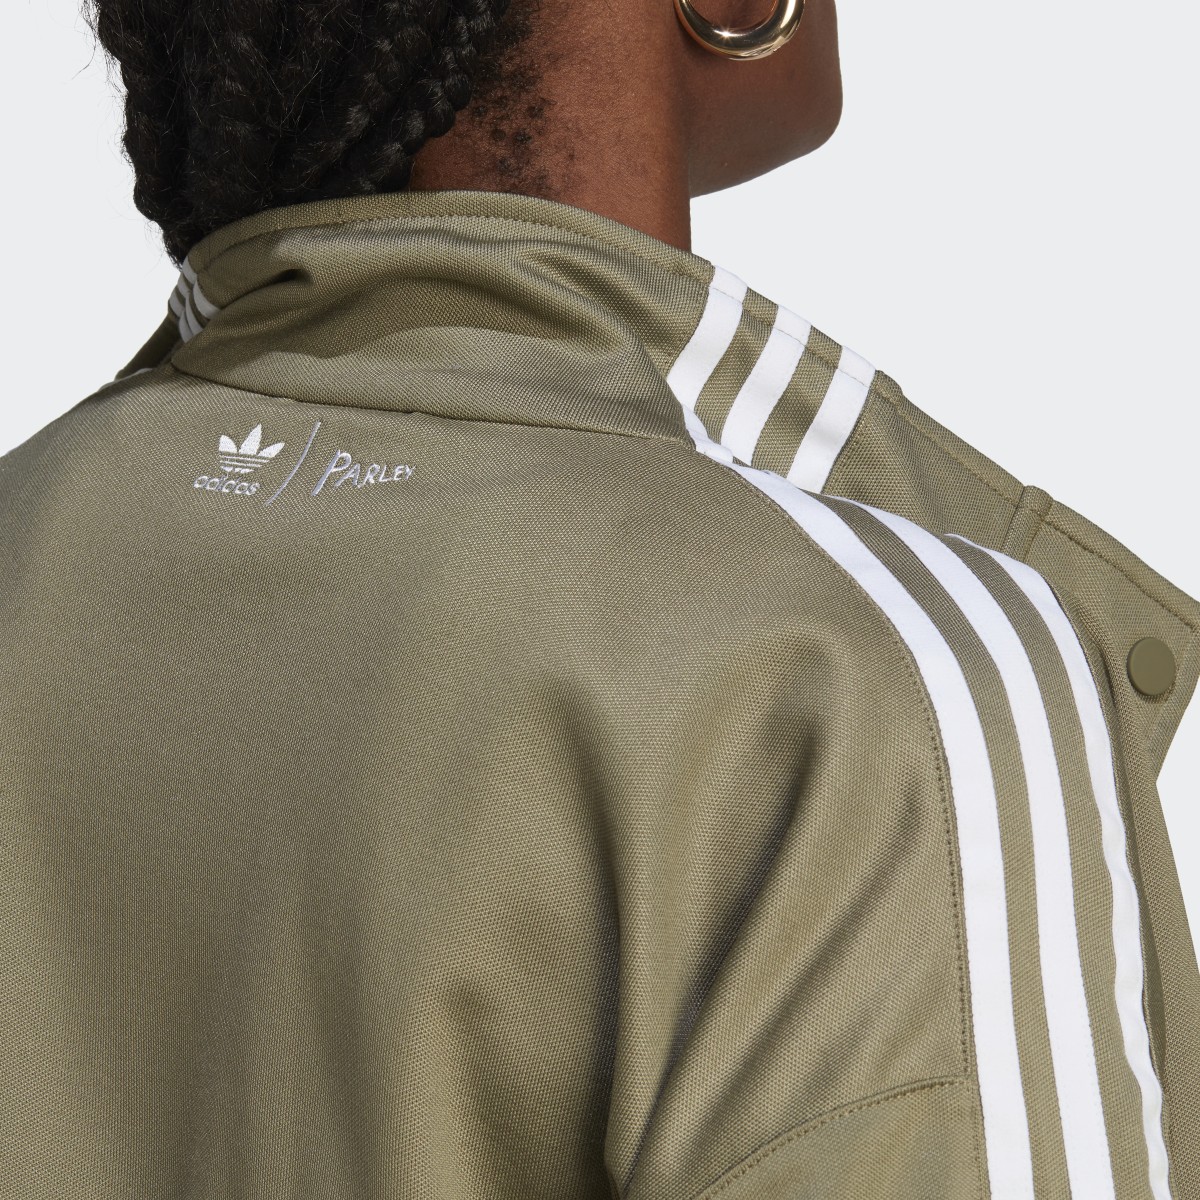 Adidas Track top Parley. 6